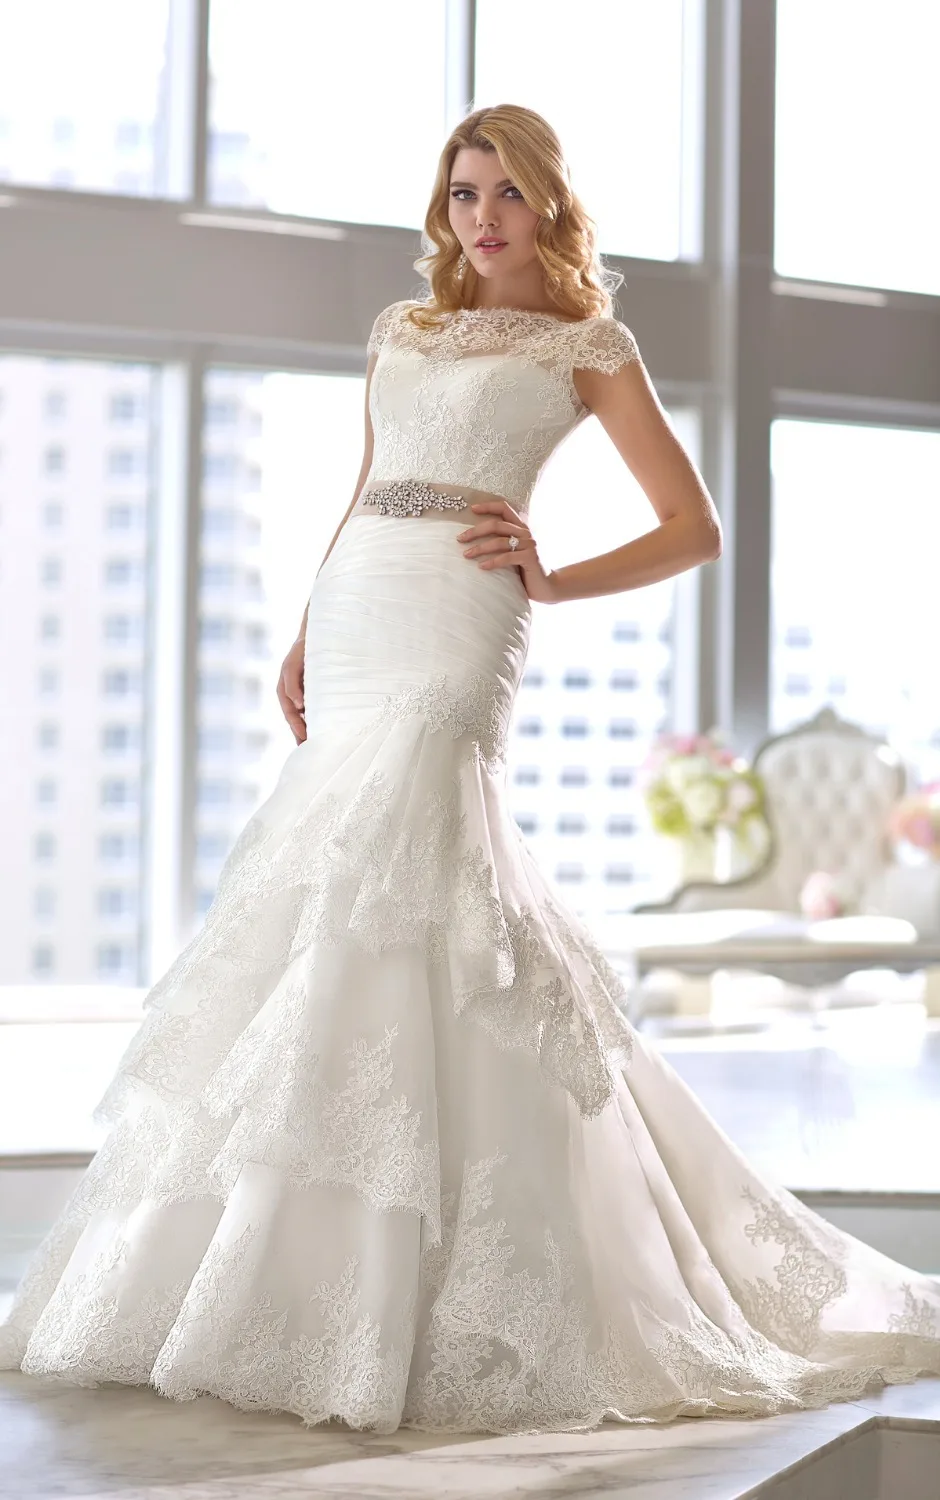 This Royal Organza and lace trumpet wedding dress comes